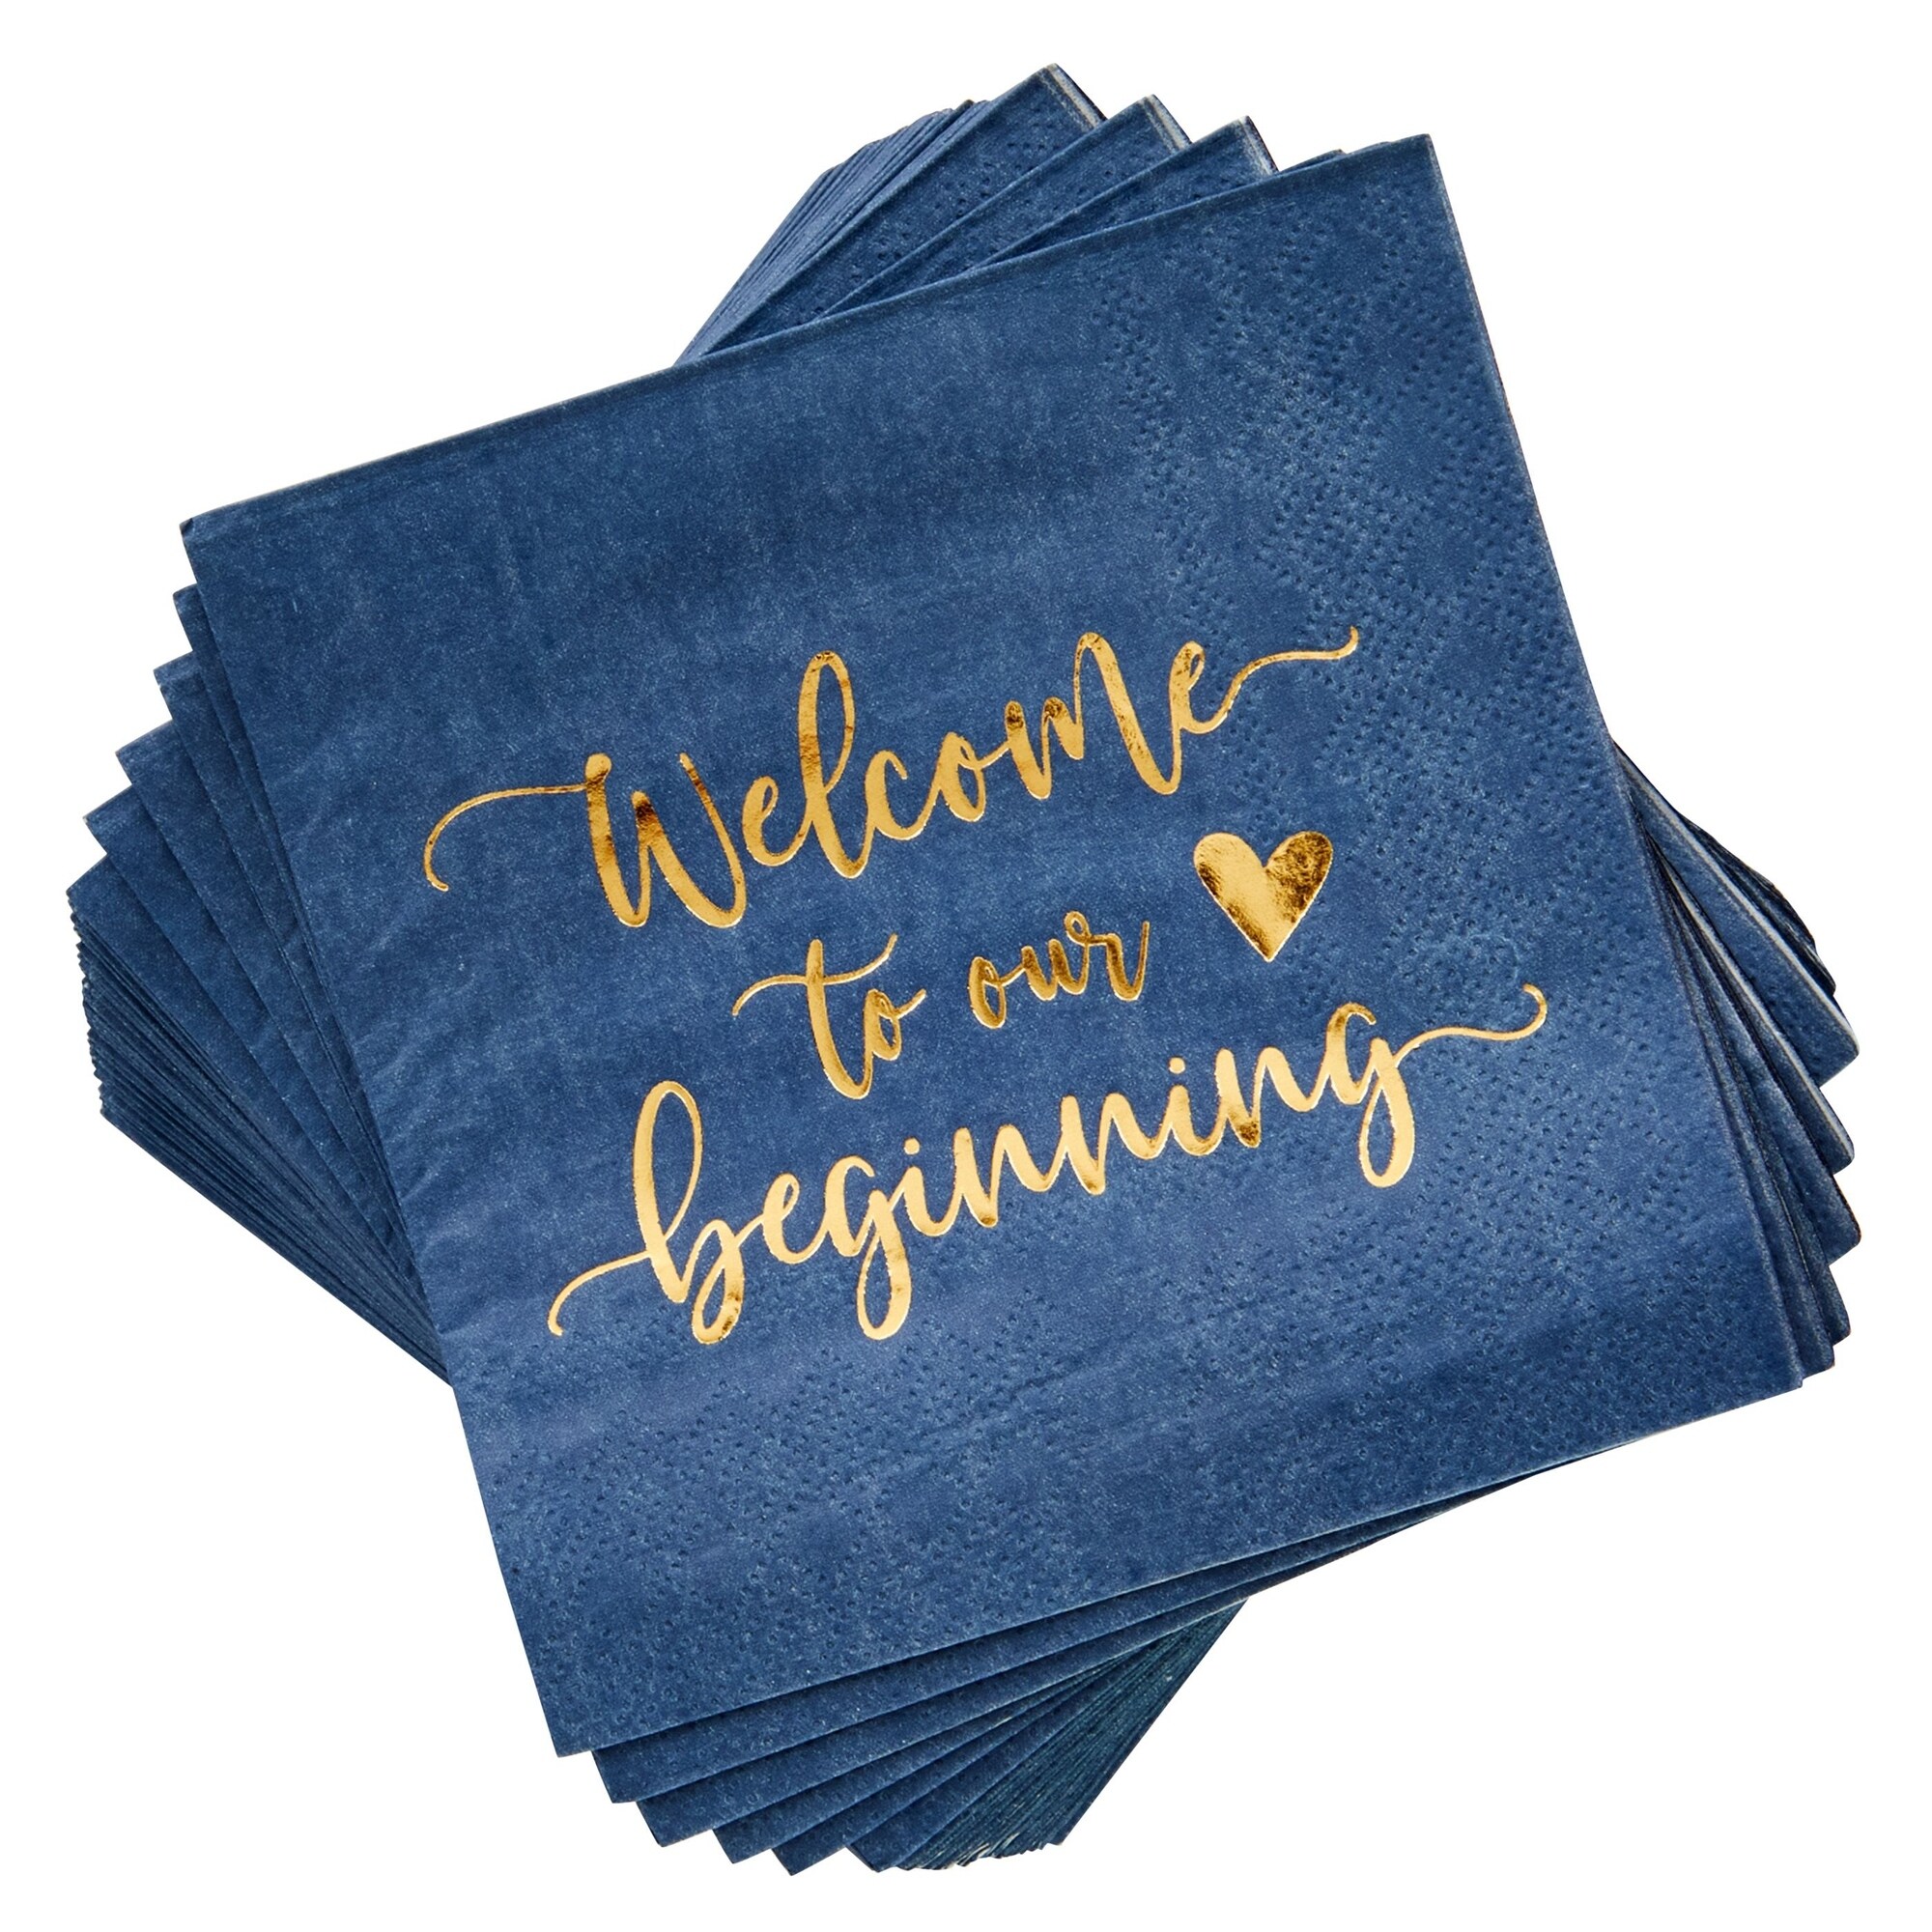 100 Pack Navy Blue Monogrammed Napkins with Letter B, Gold Foil Initial for Wedding Reception, Engagement Party (4x8 inches)